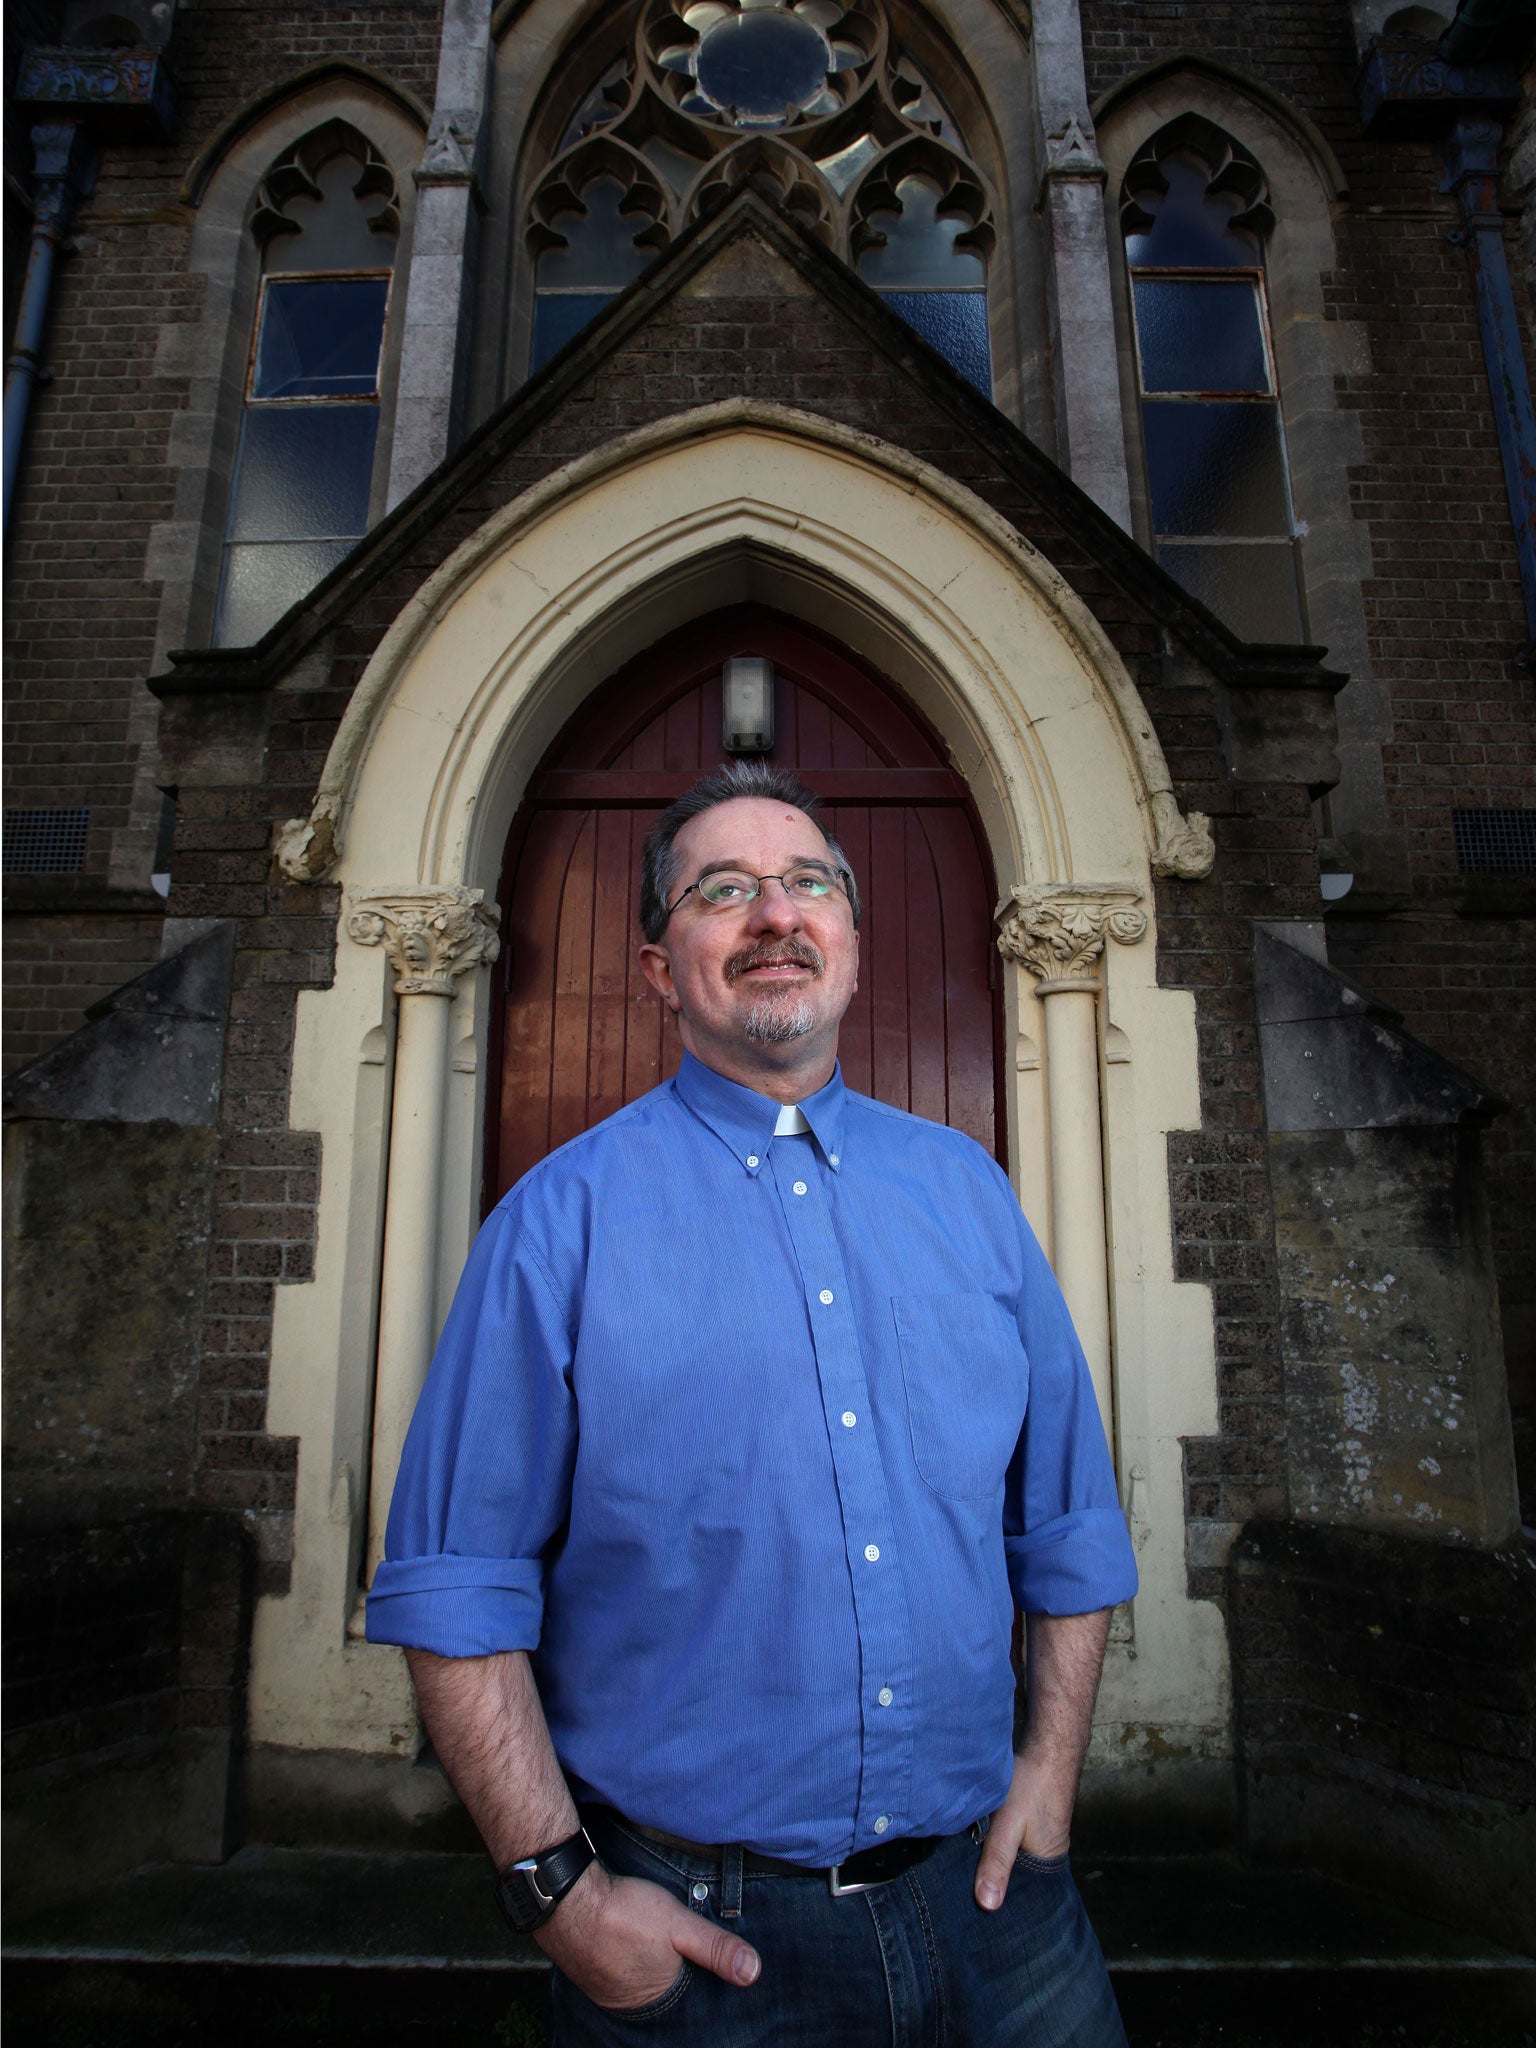 Benny Hazlehurst, who now works as a prison chaplain, at his local church in Dorchester